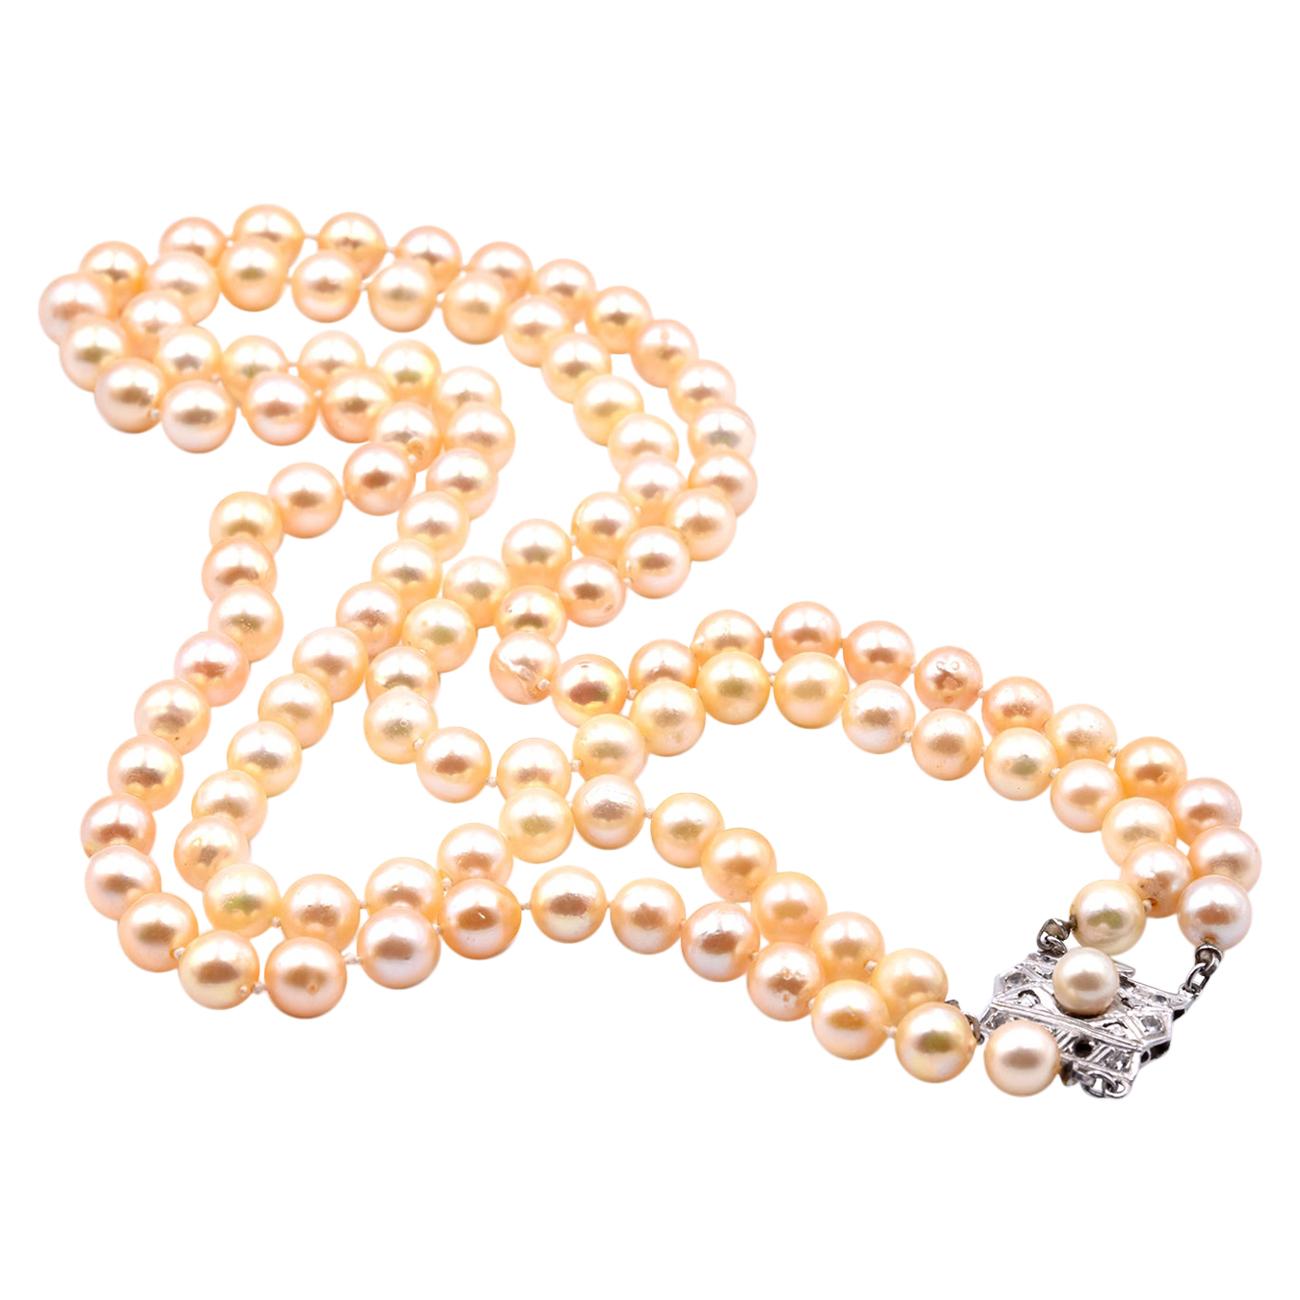 Platinum Golden Akoya Cultured Strand Pearl Necklace with White Sapphires